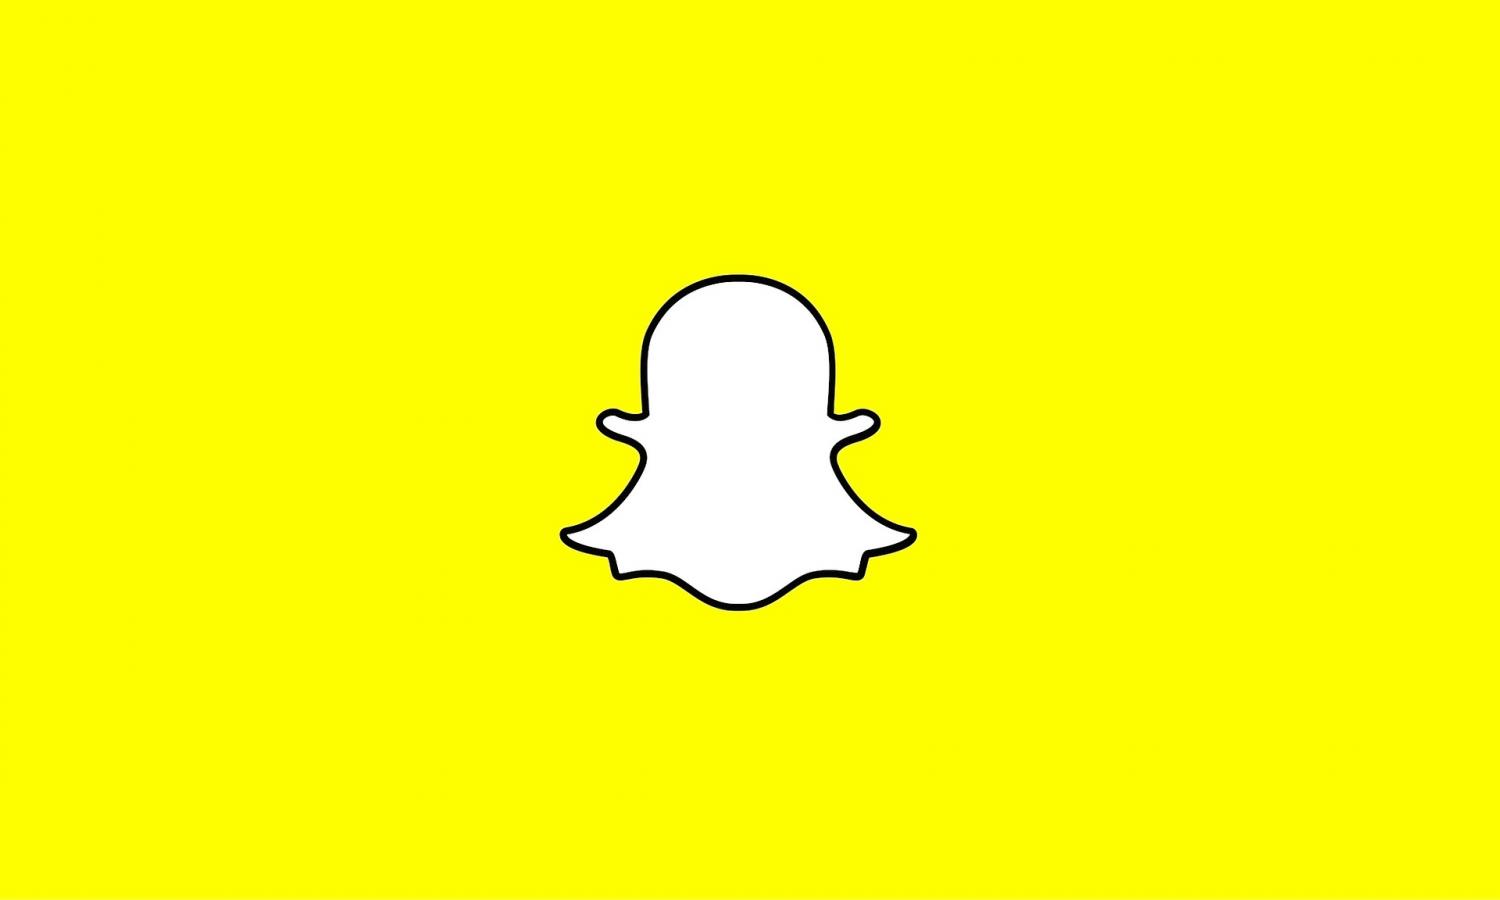 How to recover lost Snapchat account password